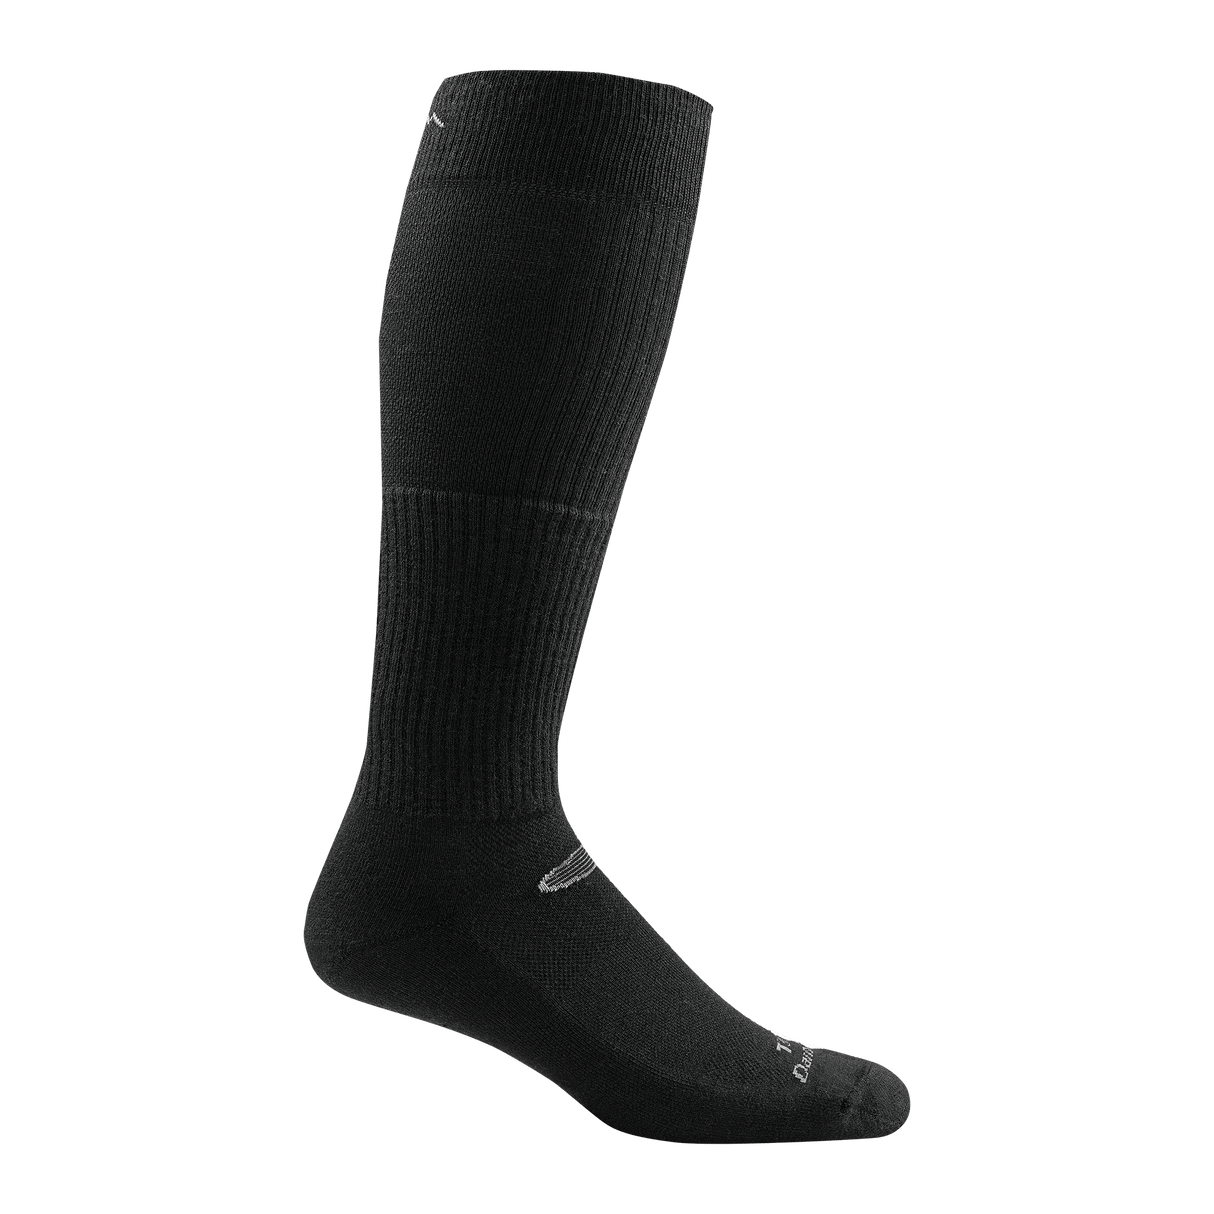 Darn Tough Over-the-Calf Lightweight Tactical Socks with Cushion  -  X-Small / Black